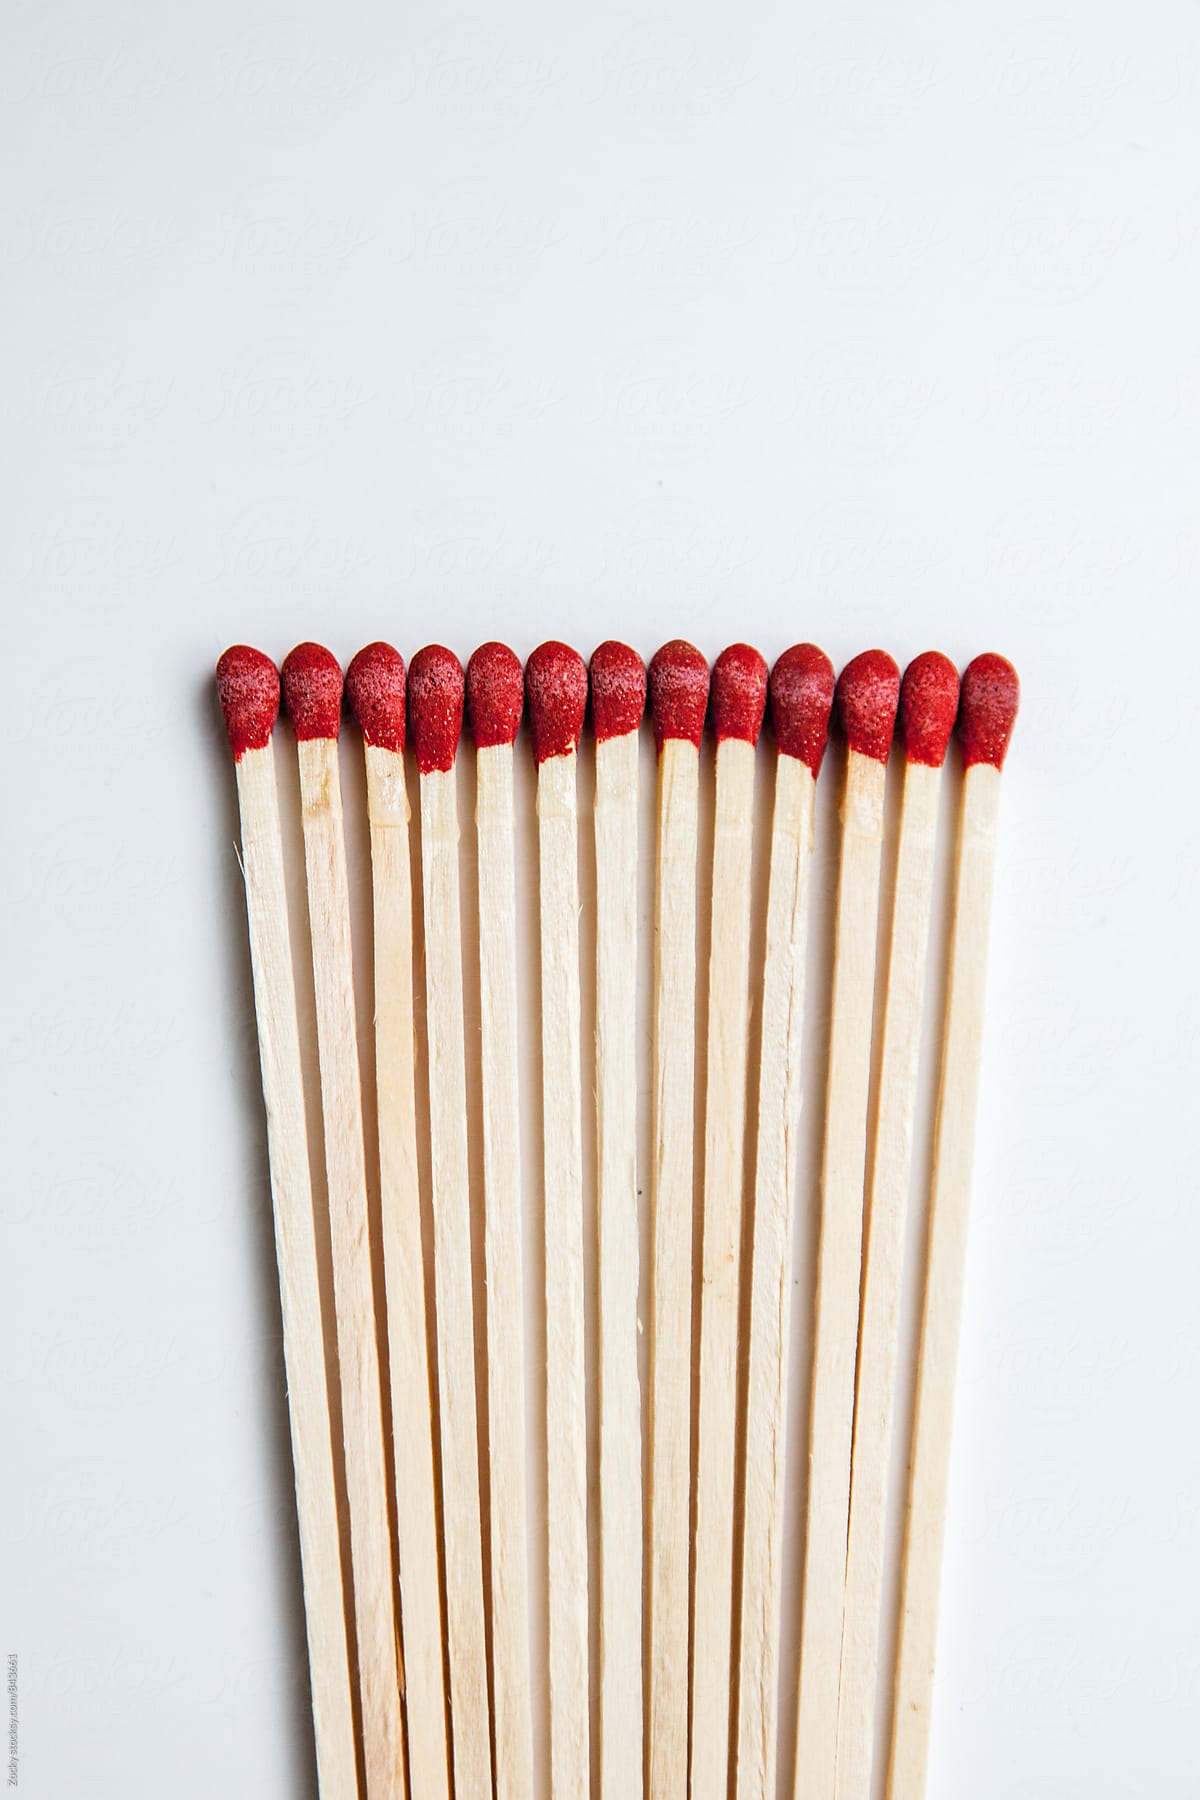 Matches in a row on white background